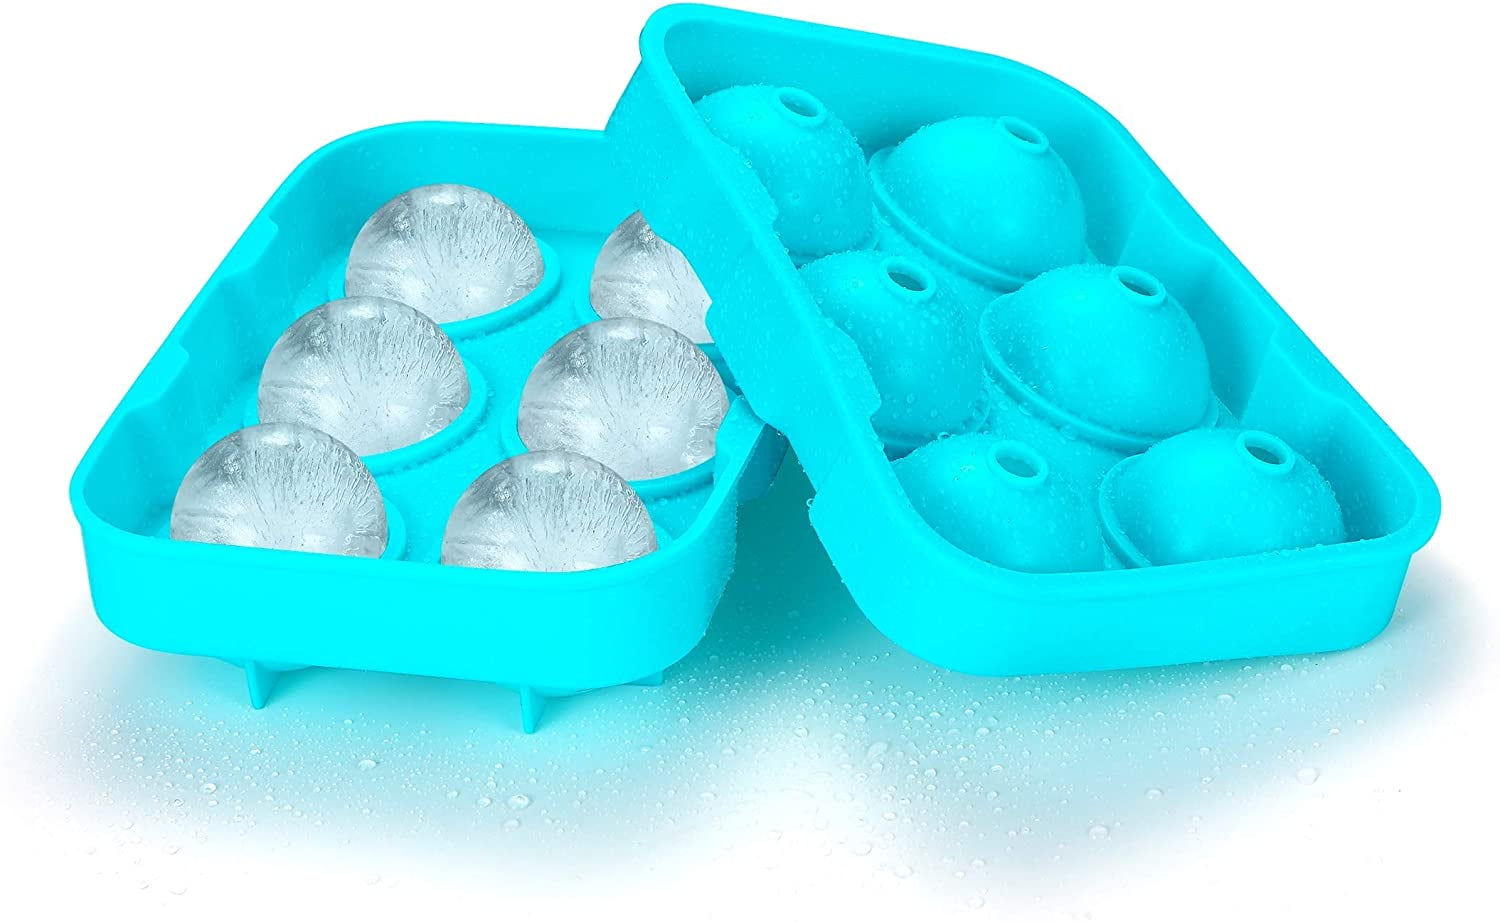 Large Square Ice Cube Trays - SLGOL Silicone Ice Maker with BPA